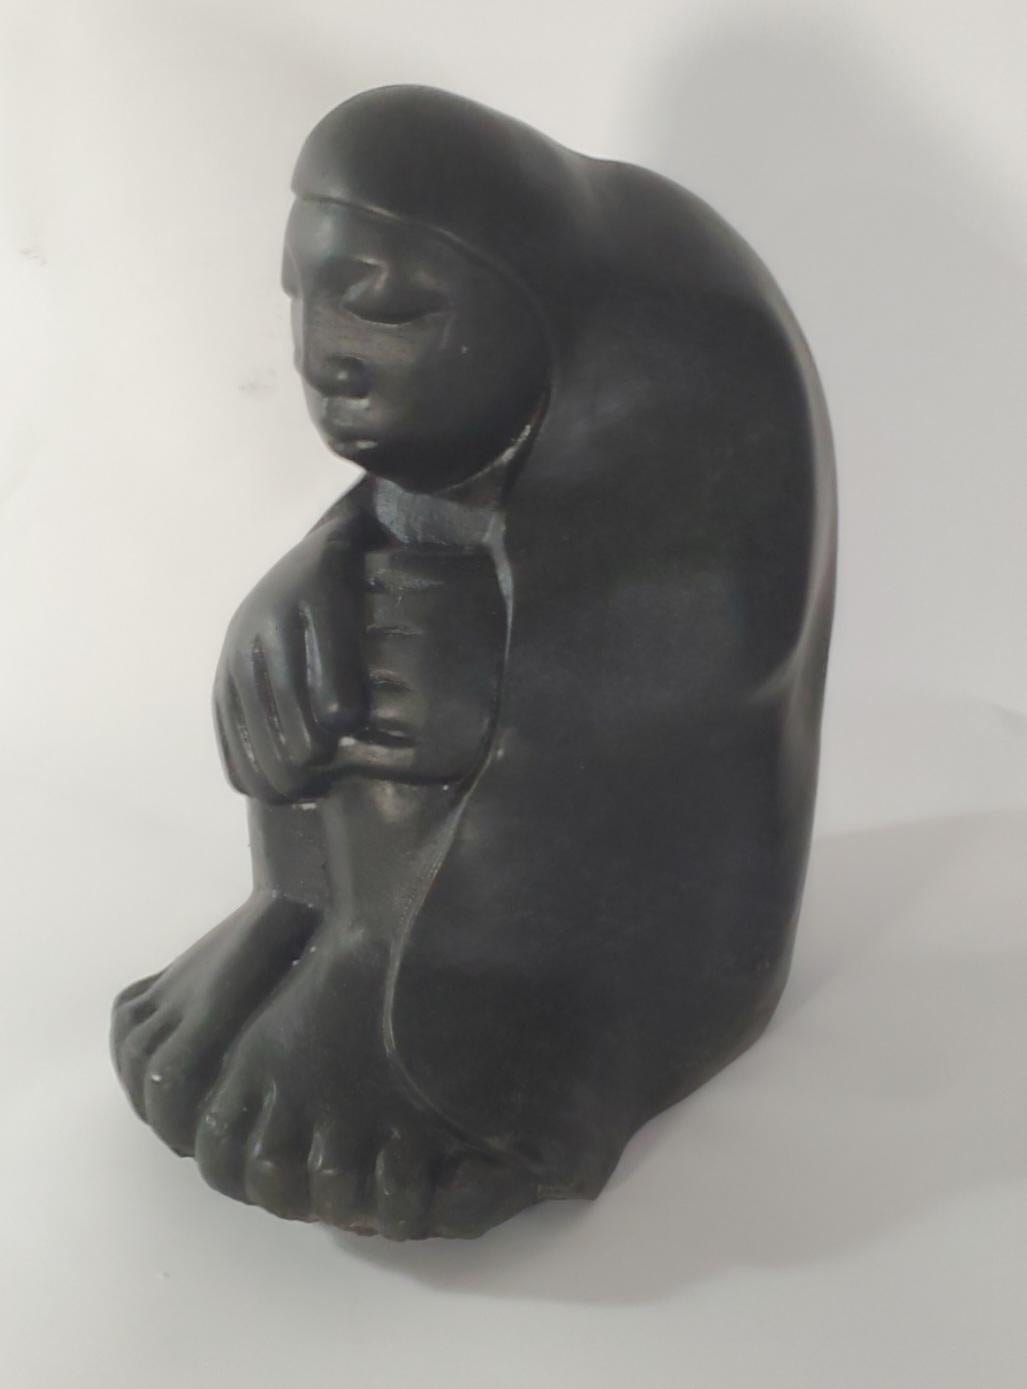 Joseph Ndandarika (Zimbabwe, 1941 - 1991)

Huddled Woman

12 x 10 1/2 x 6 inches

Carved serpentine stone, signed

 

This carved stone sculpture by Joseph Ndandarika (1941 - 1991) is from a private collection. The family owns a quality collection